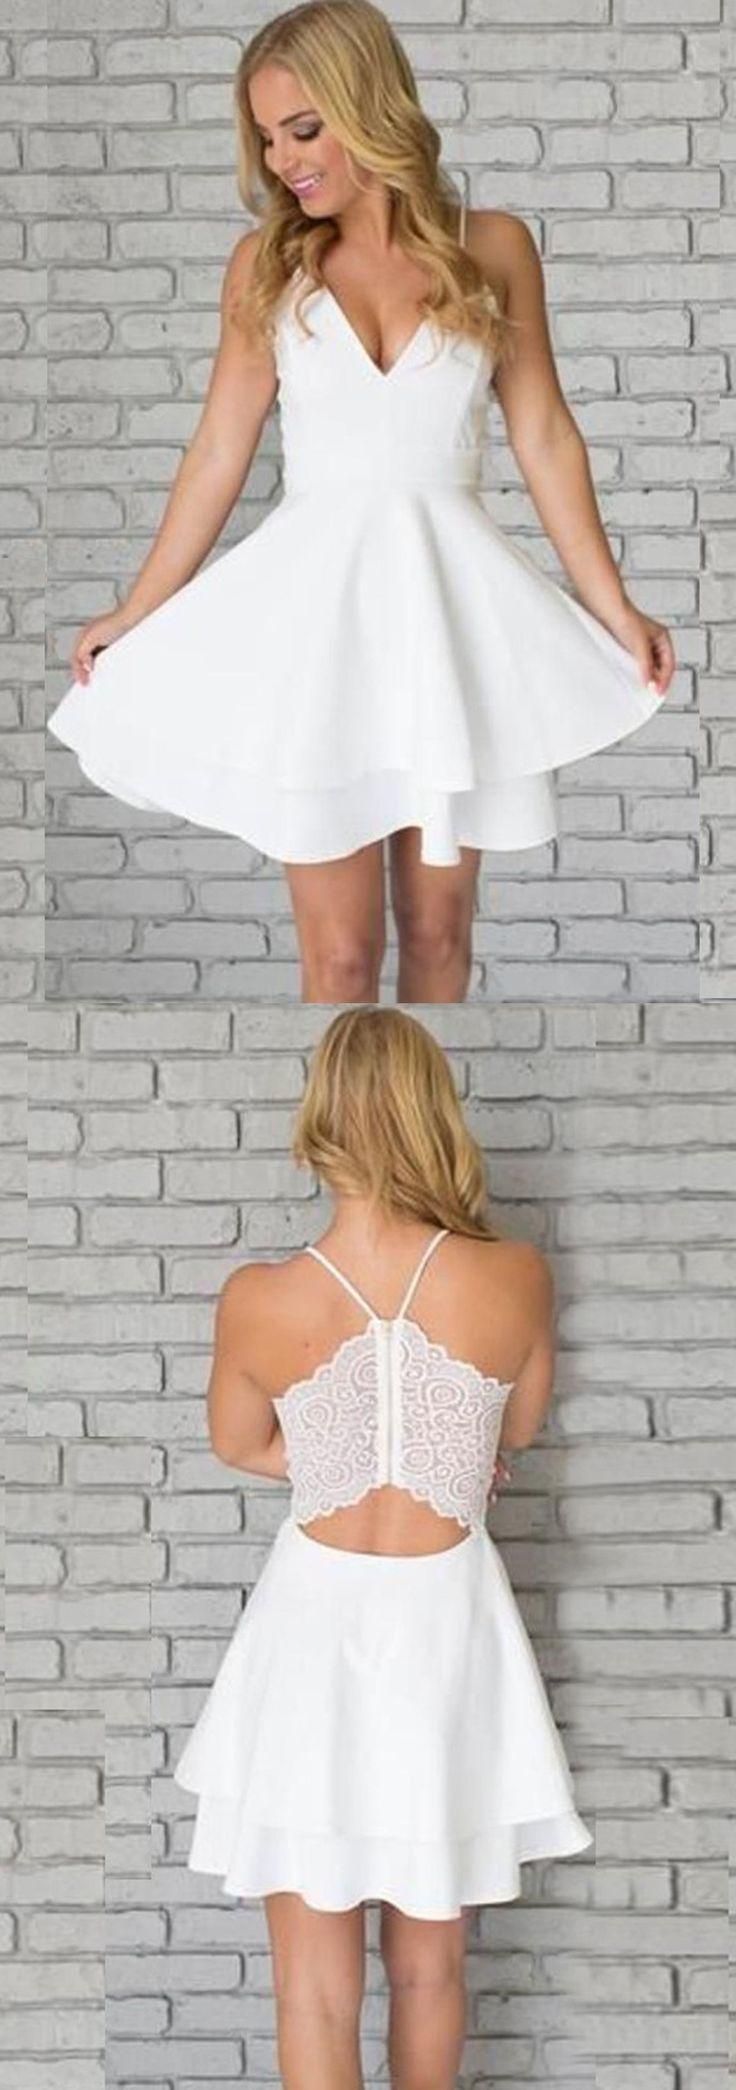 Wedding - A-Line Spaghetti Straps Short White Satin Homecoming Dress With Lace